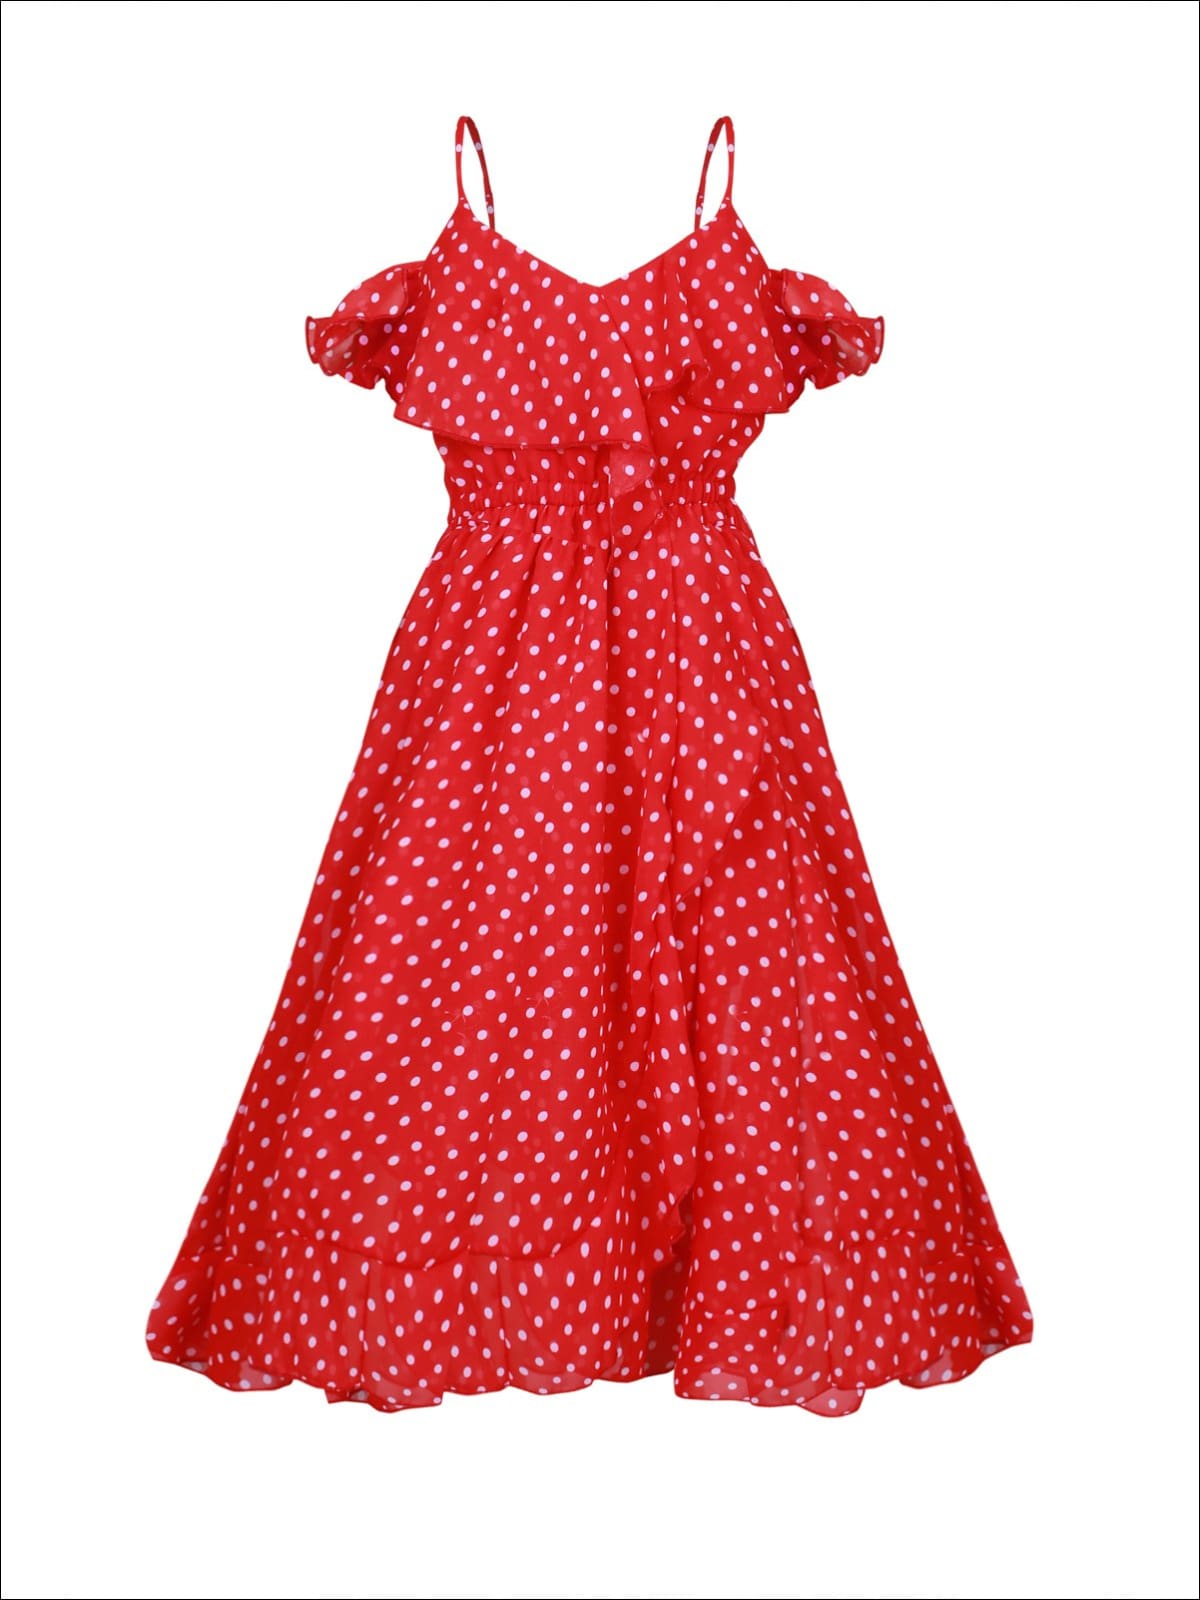 Girls Faux Wrap Polka Dot Off the Shoulder Ruffled Dress - Red / 2T/3T - Girls Spring Casual Dress